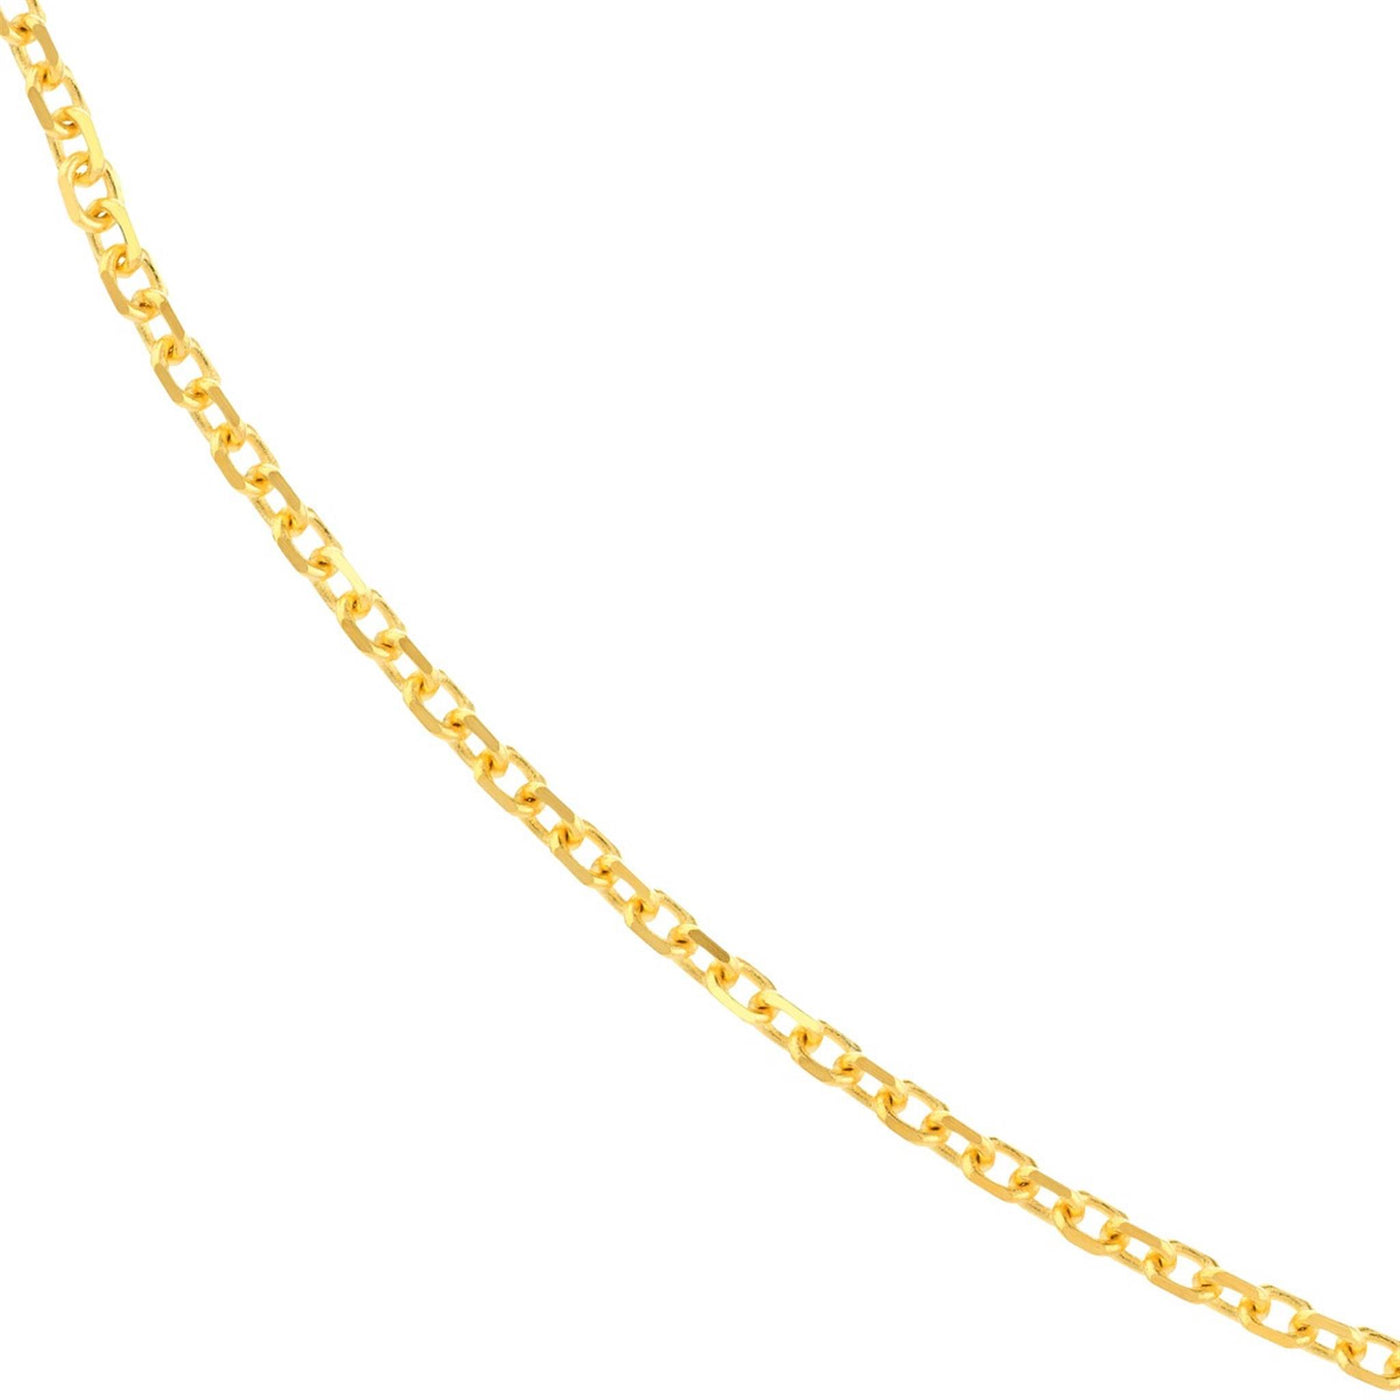 14K Yellow Gold 1.1mm 22" Adjustable Cable Link Chain